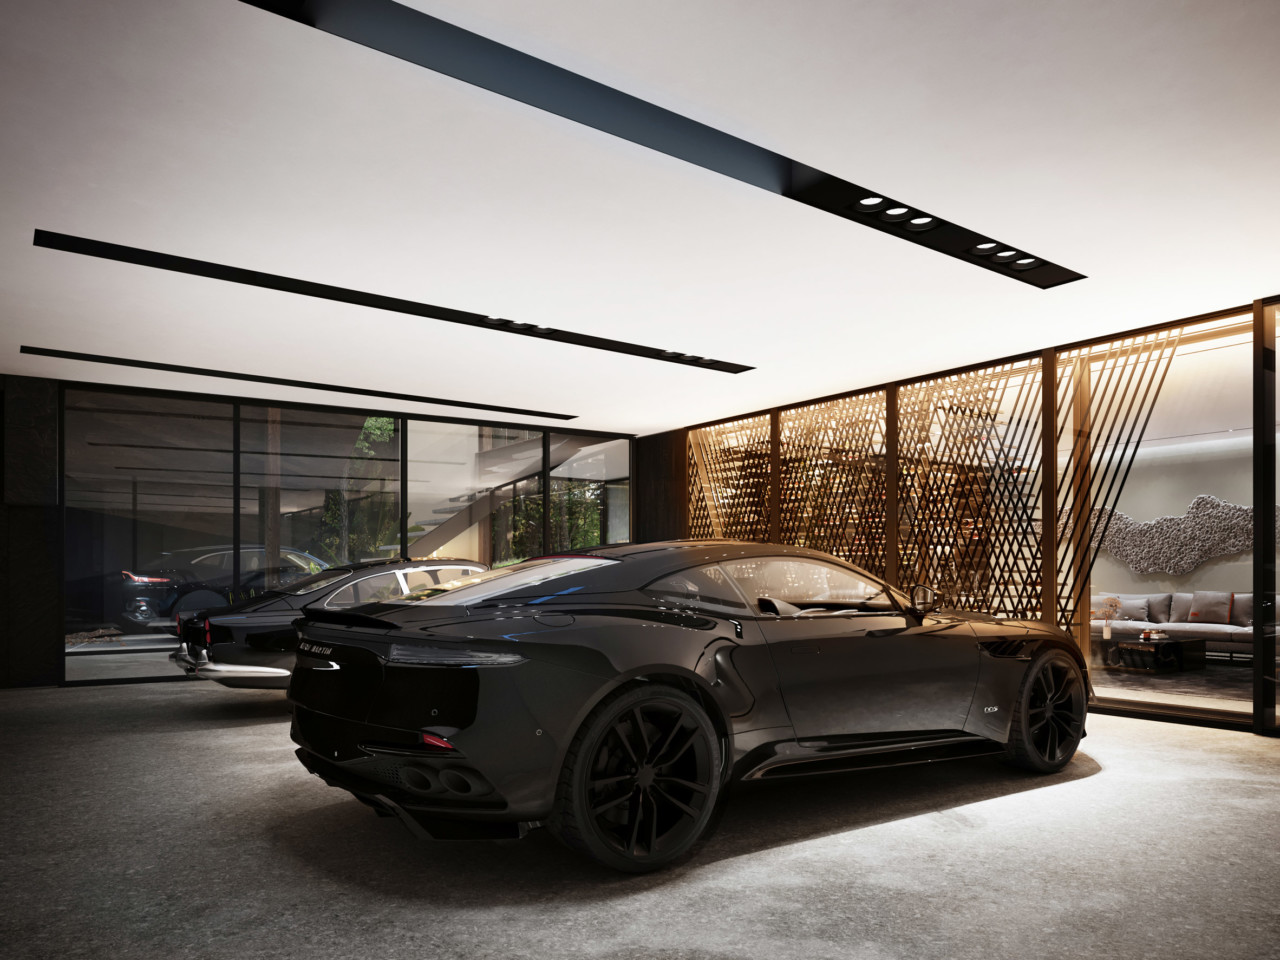 An aston martin in a glass-walled room